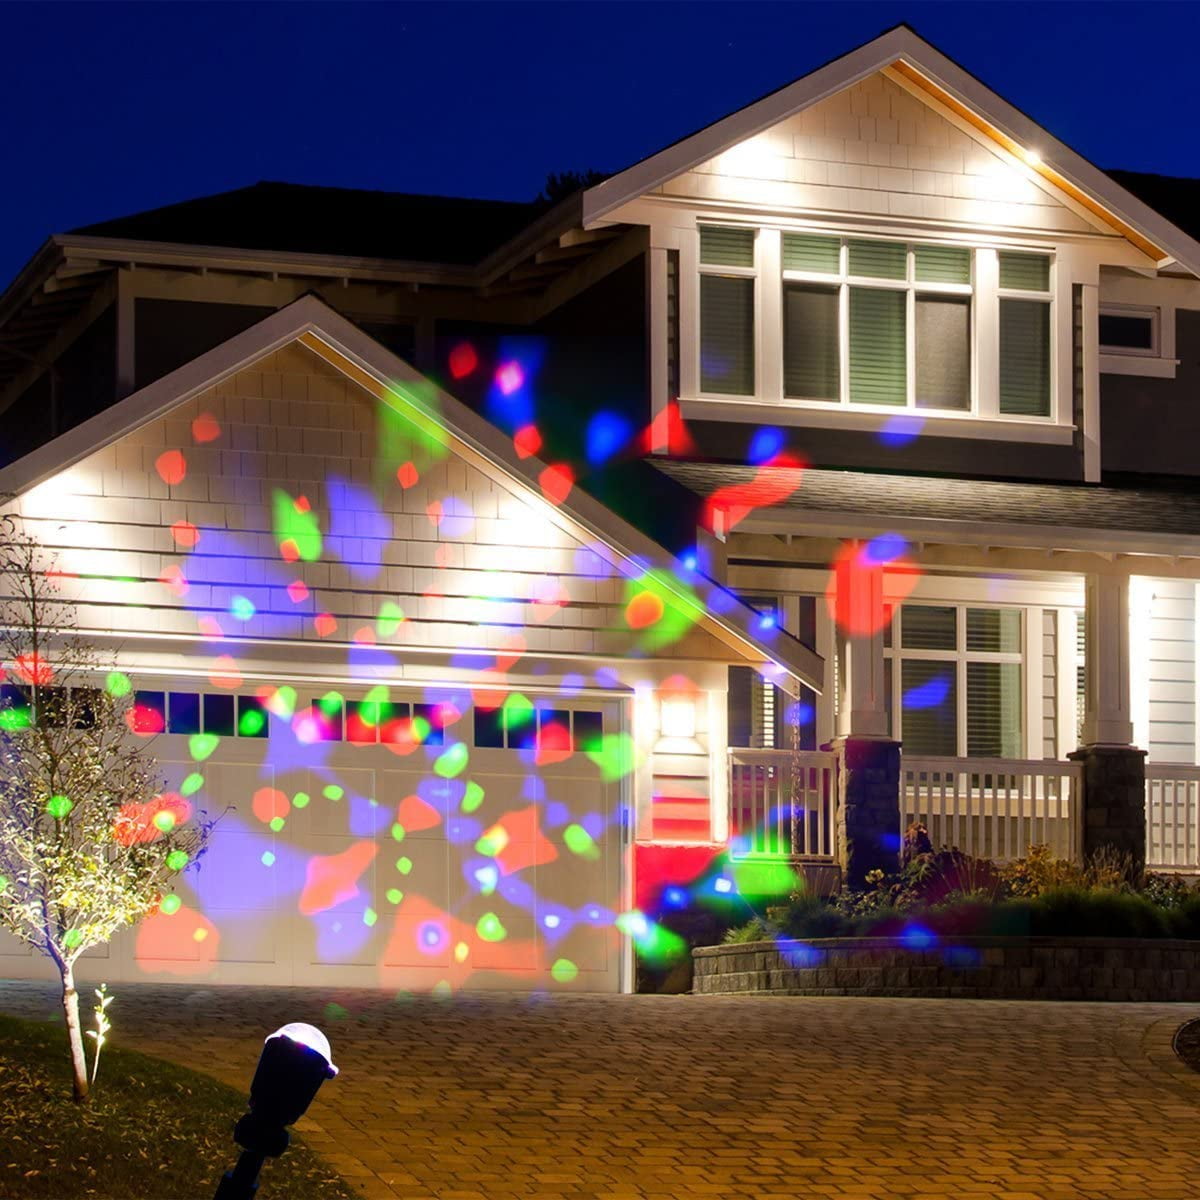 LED LightShow Light Confetti Projection Kaleidoscope Outdoor Projector-Christmas 